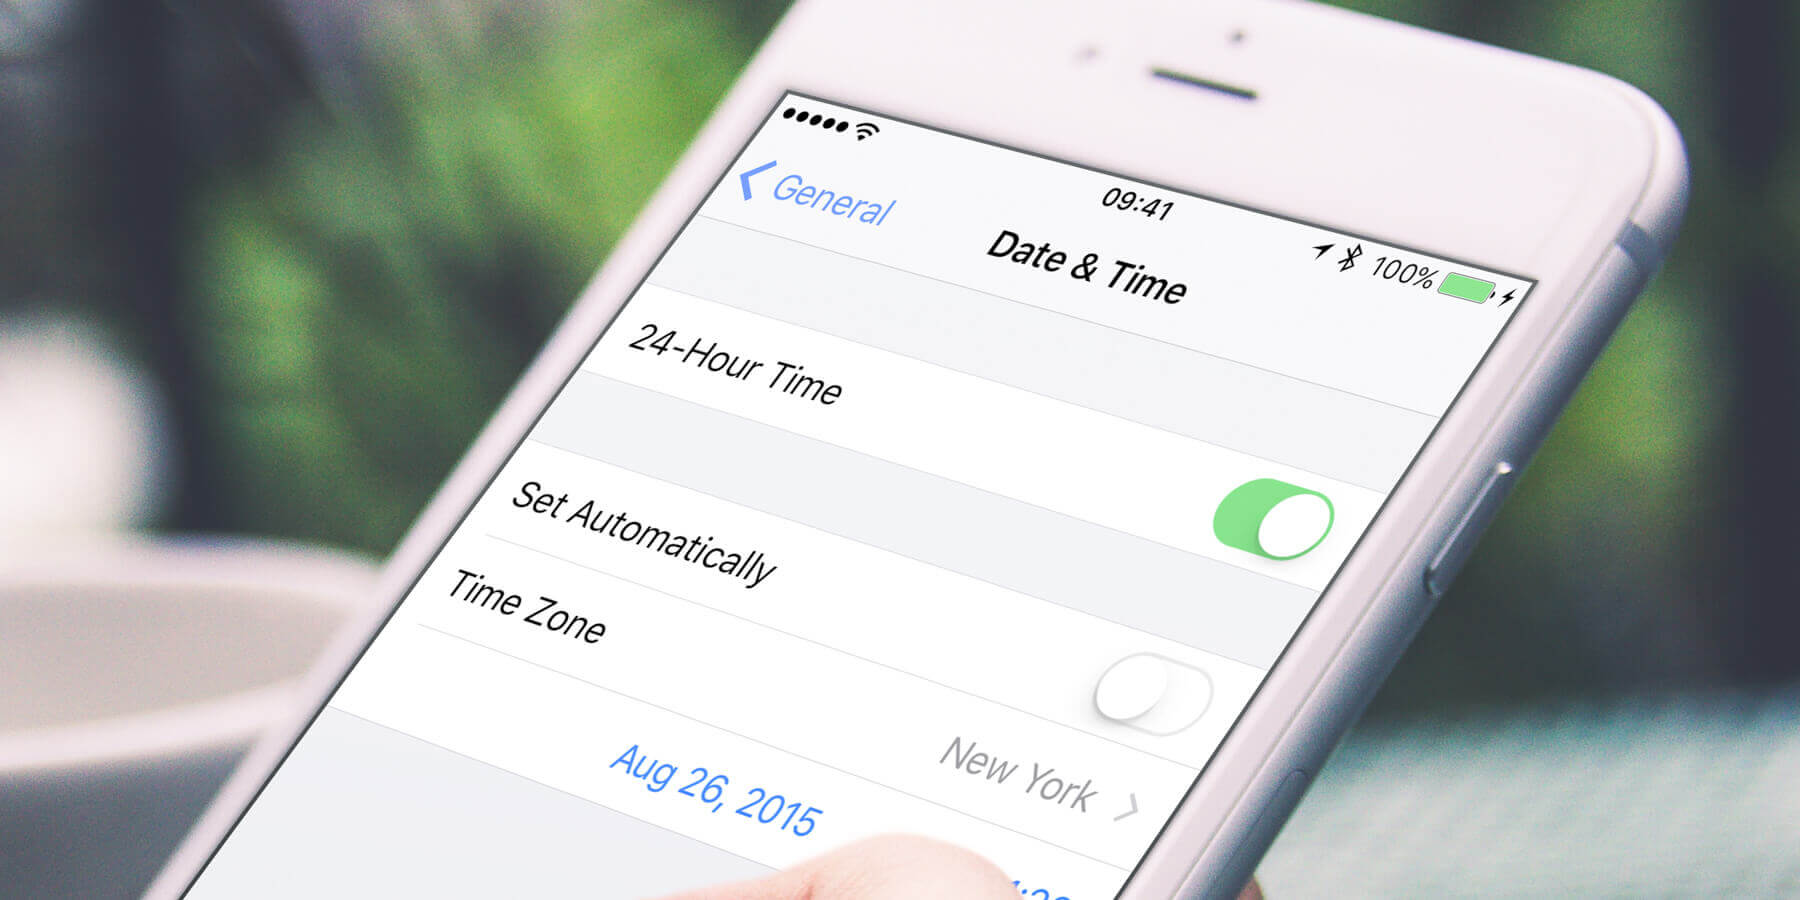 How To Change The Time On An IPhone